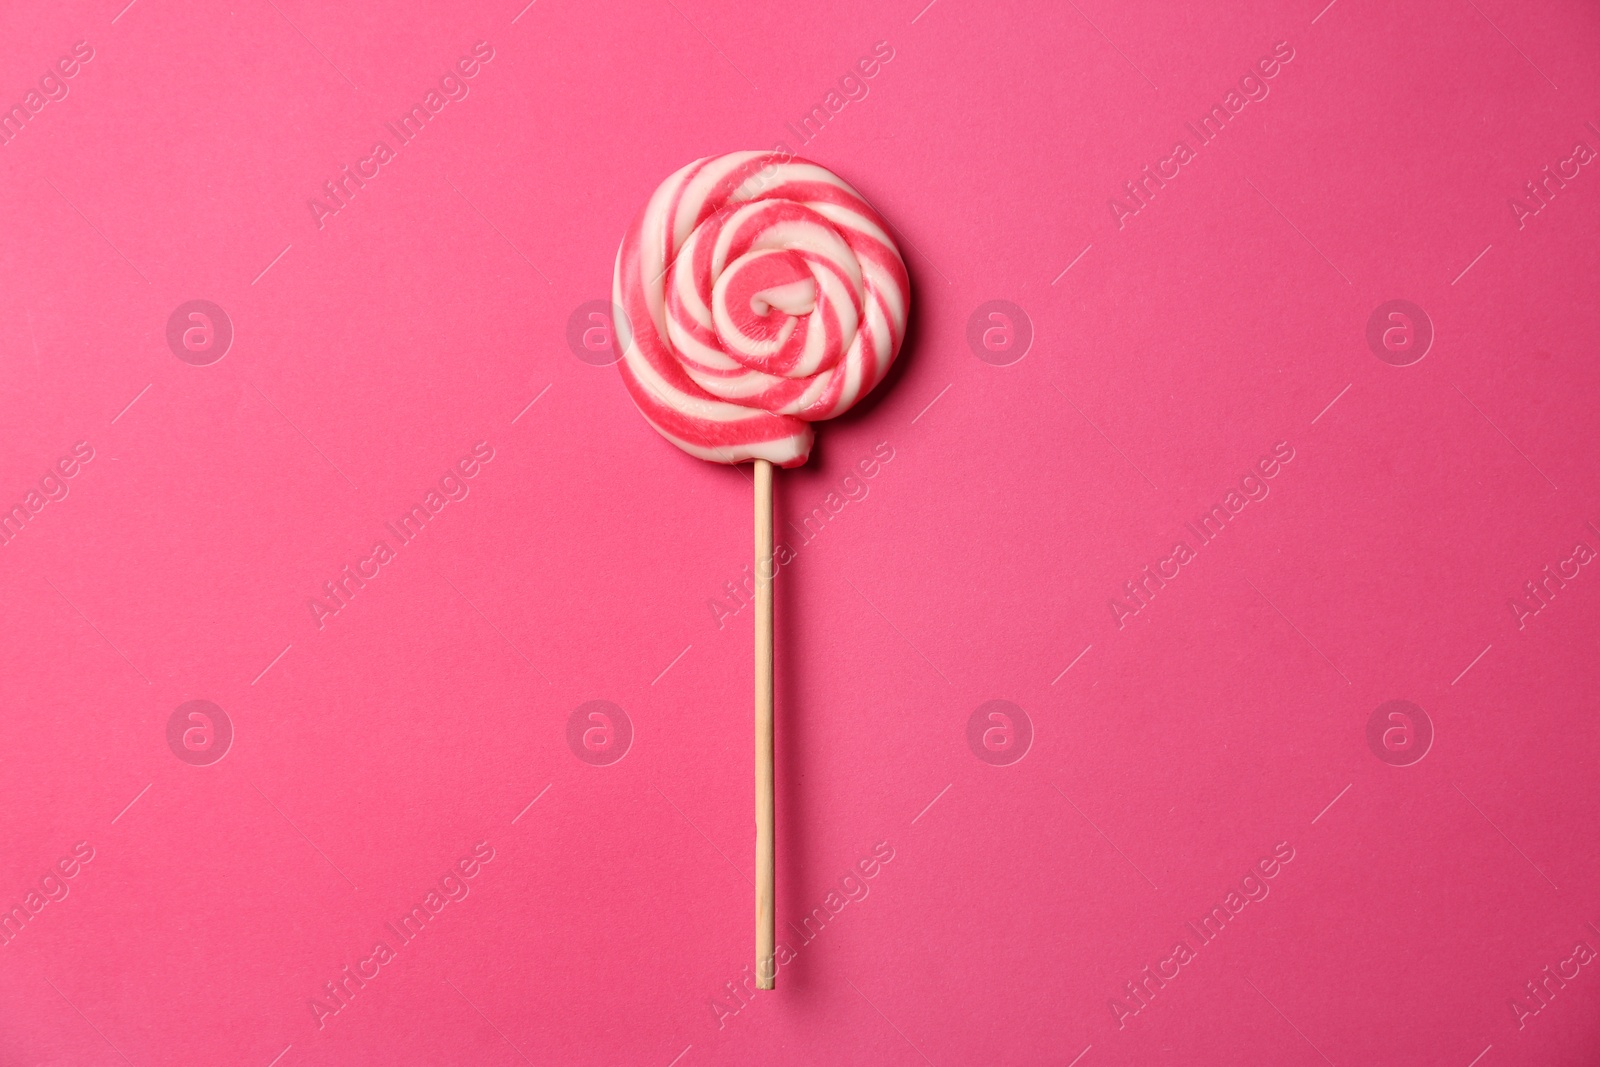 Photo of Stick with tasty sweet lollipop on pink background, top view